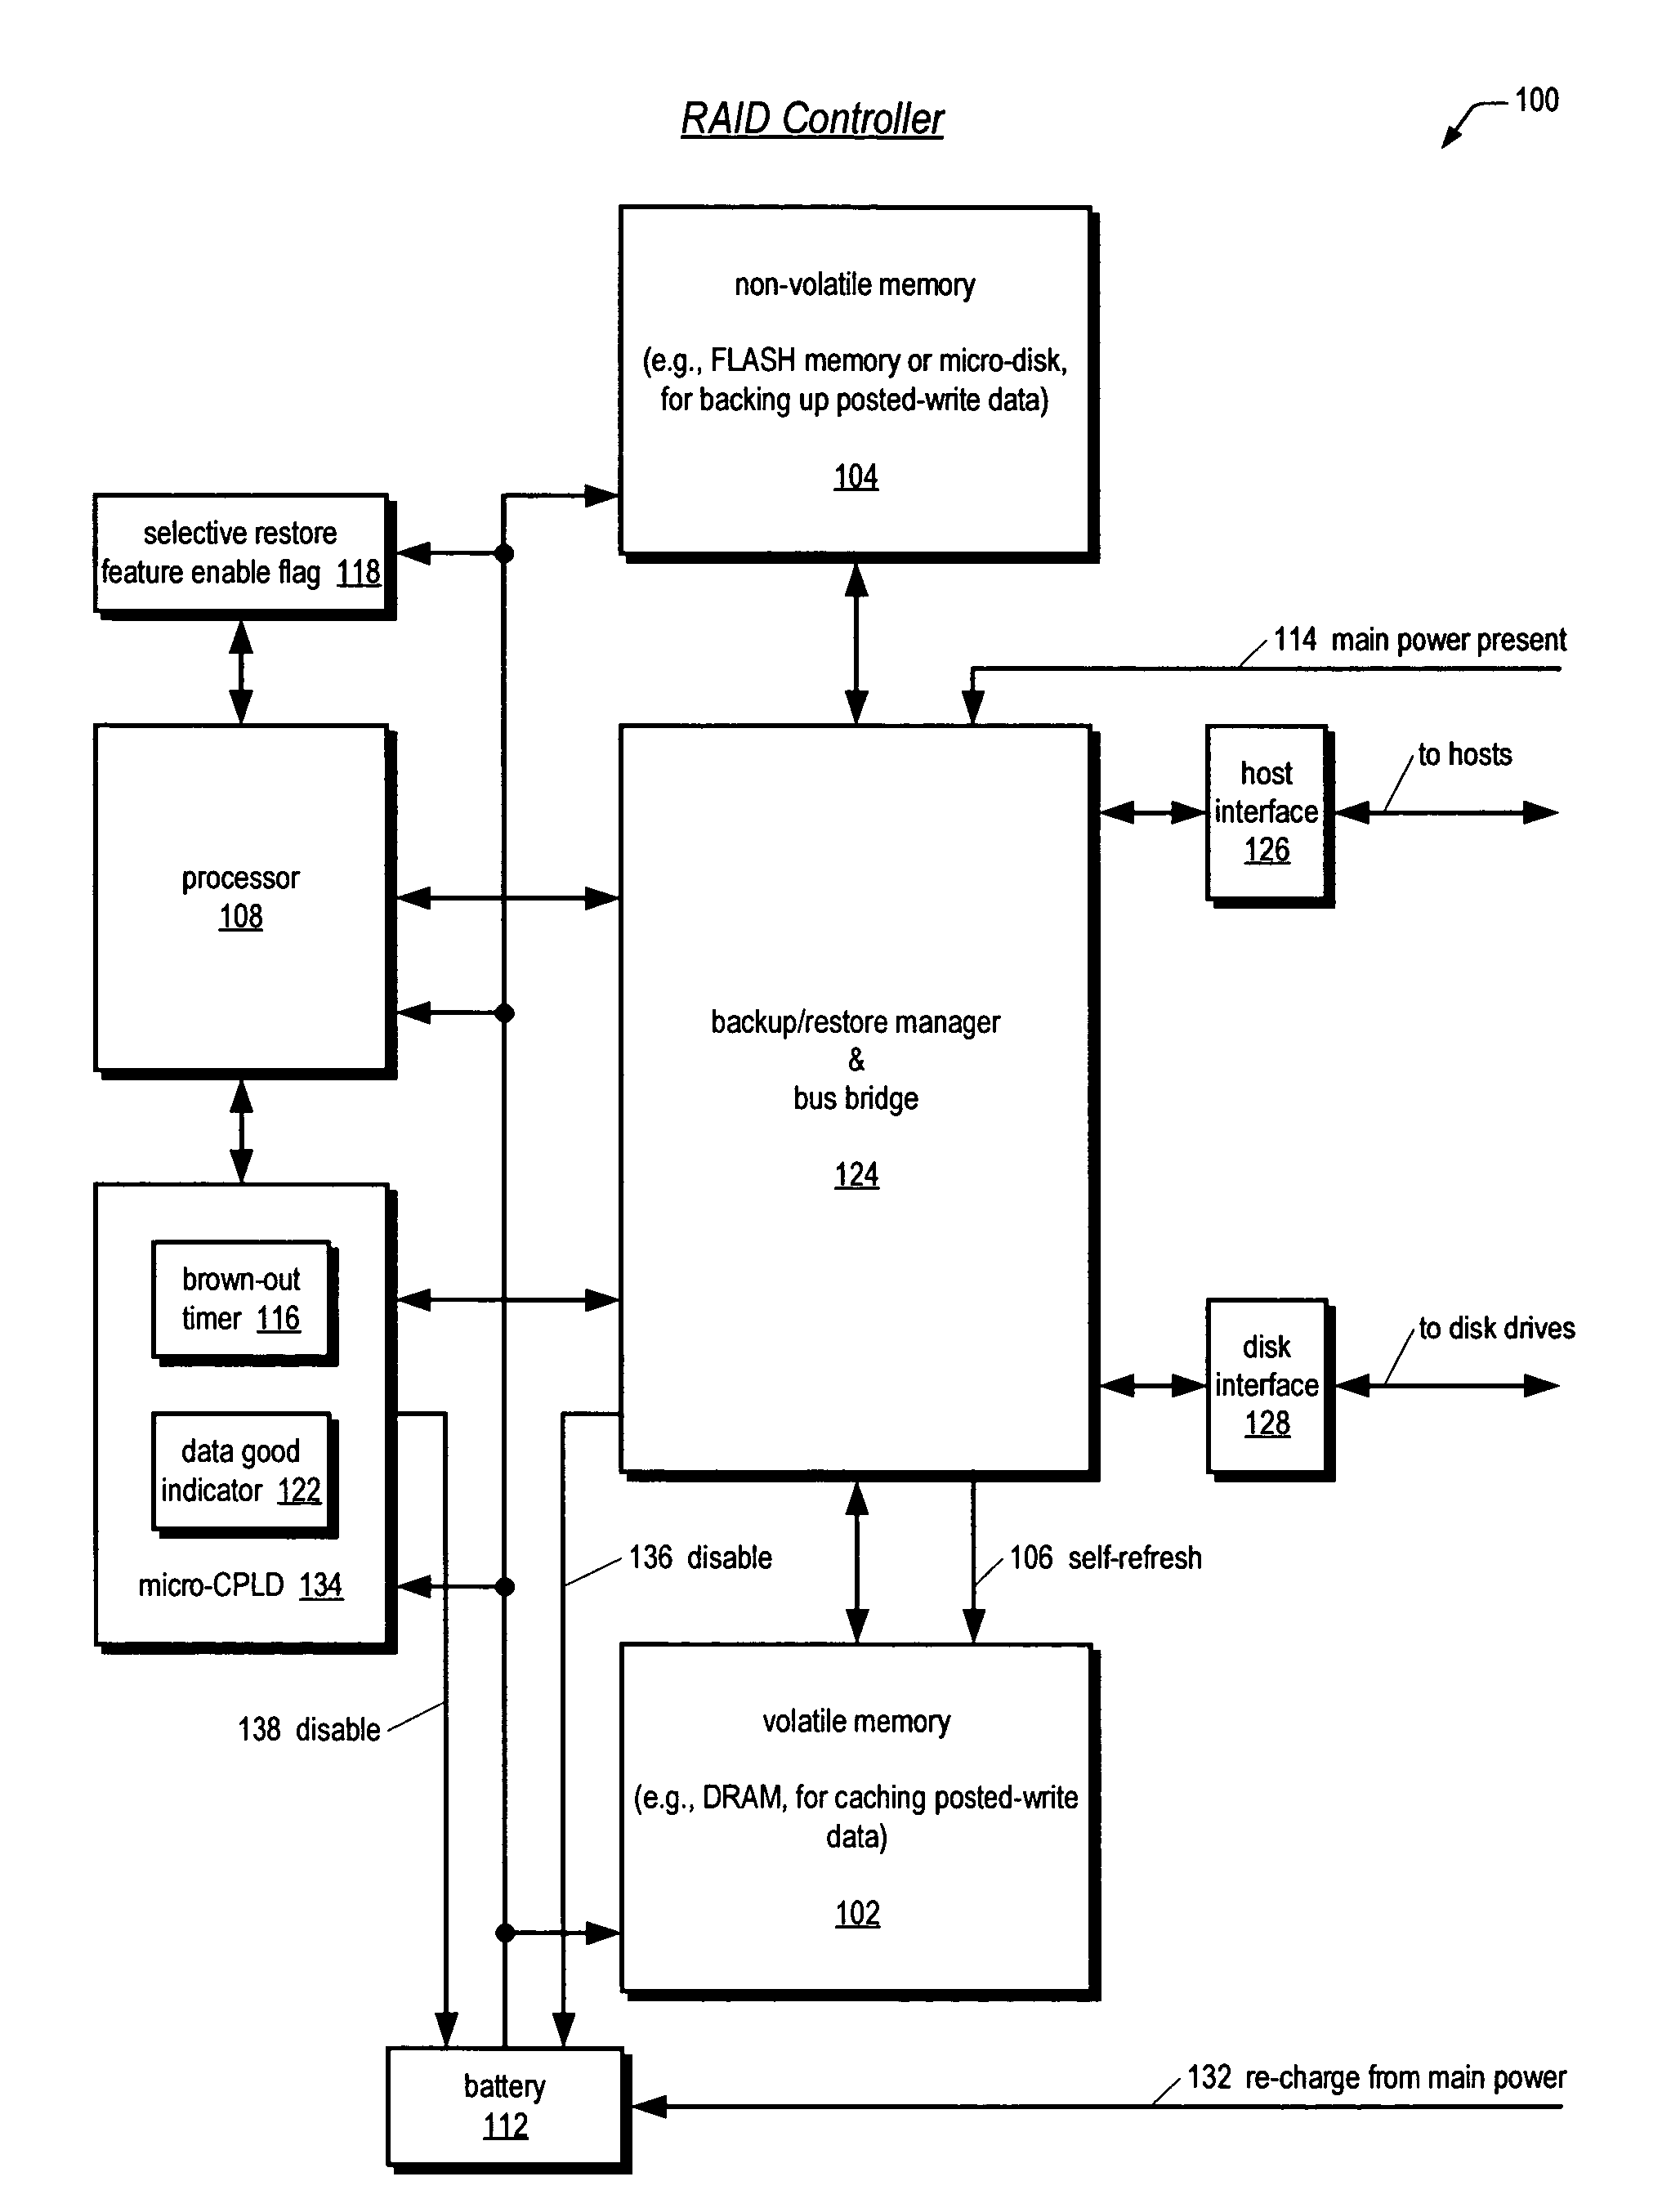 Apparatus and method in a cached raid controller utilizing a solid state backup device for improving data availability time